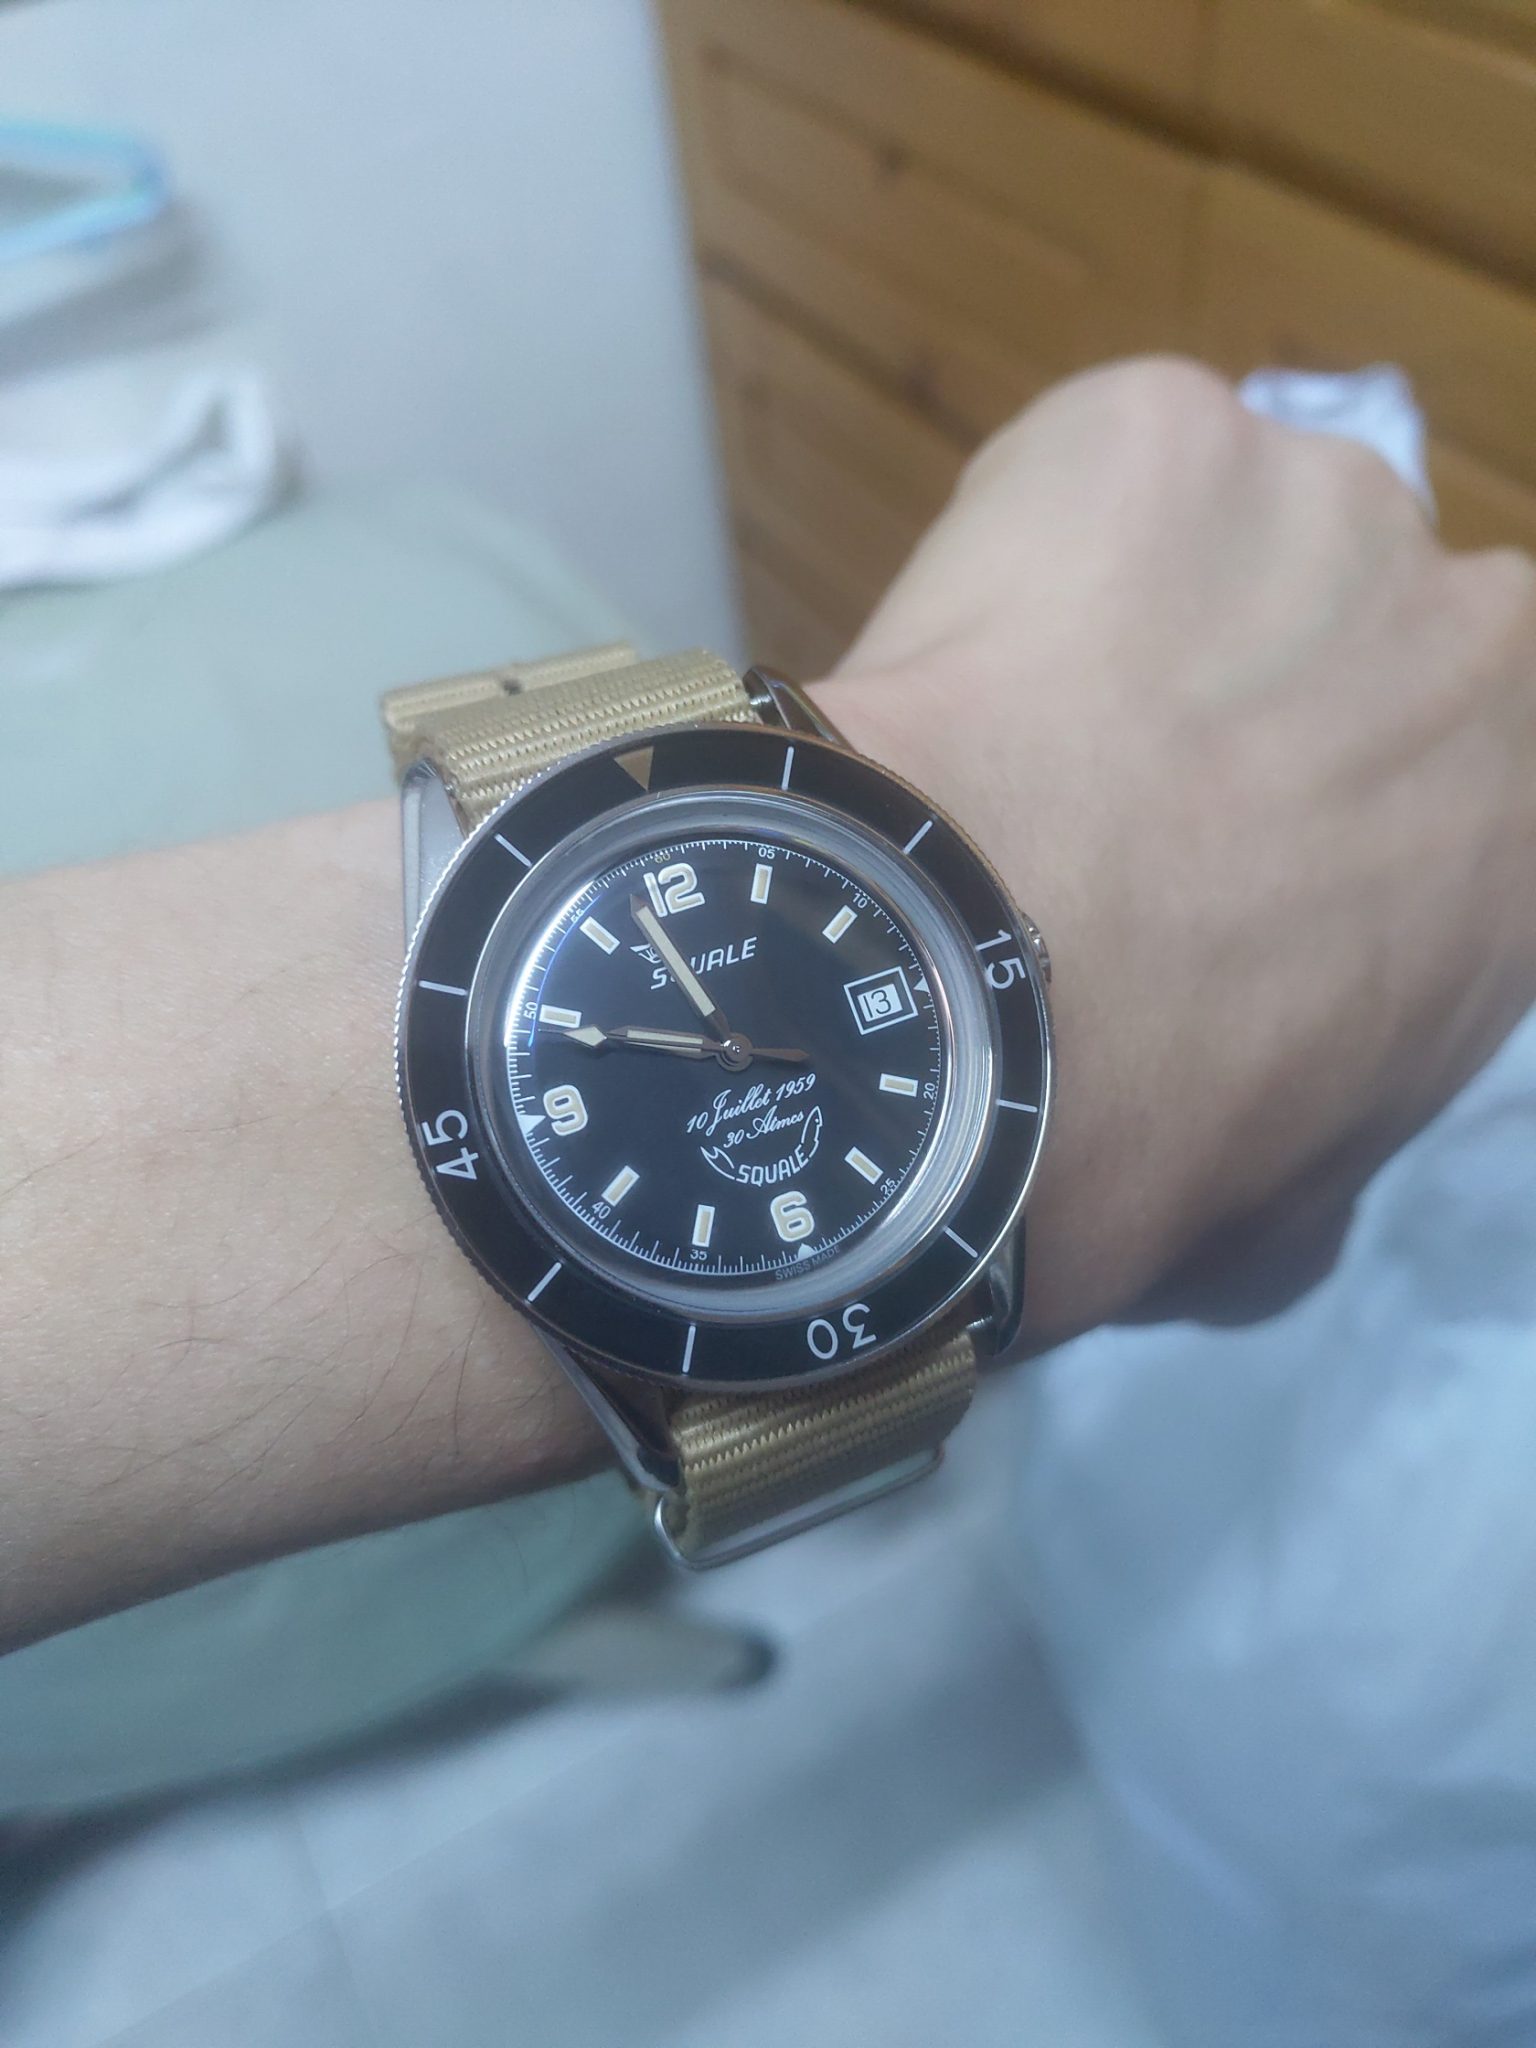 Owner Review: Squale 30 Atmos 60th Anniversary Edition